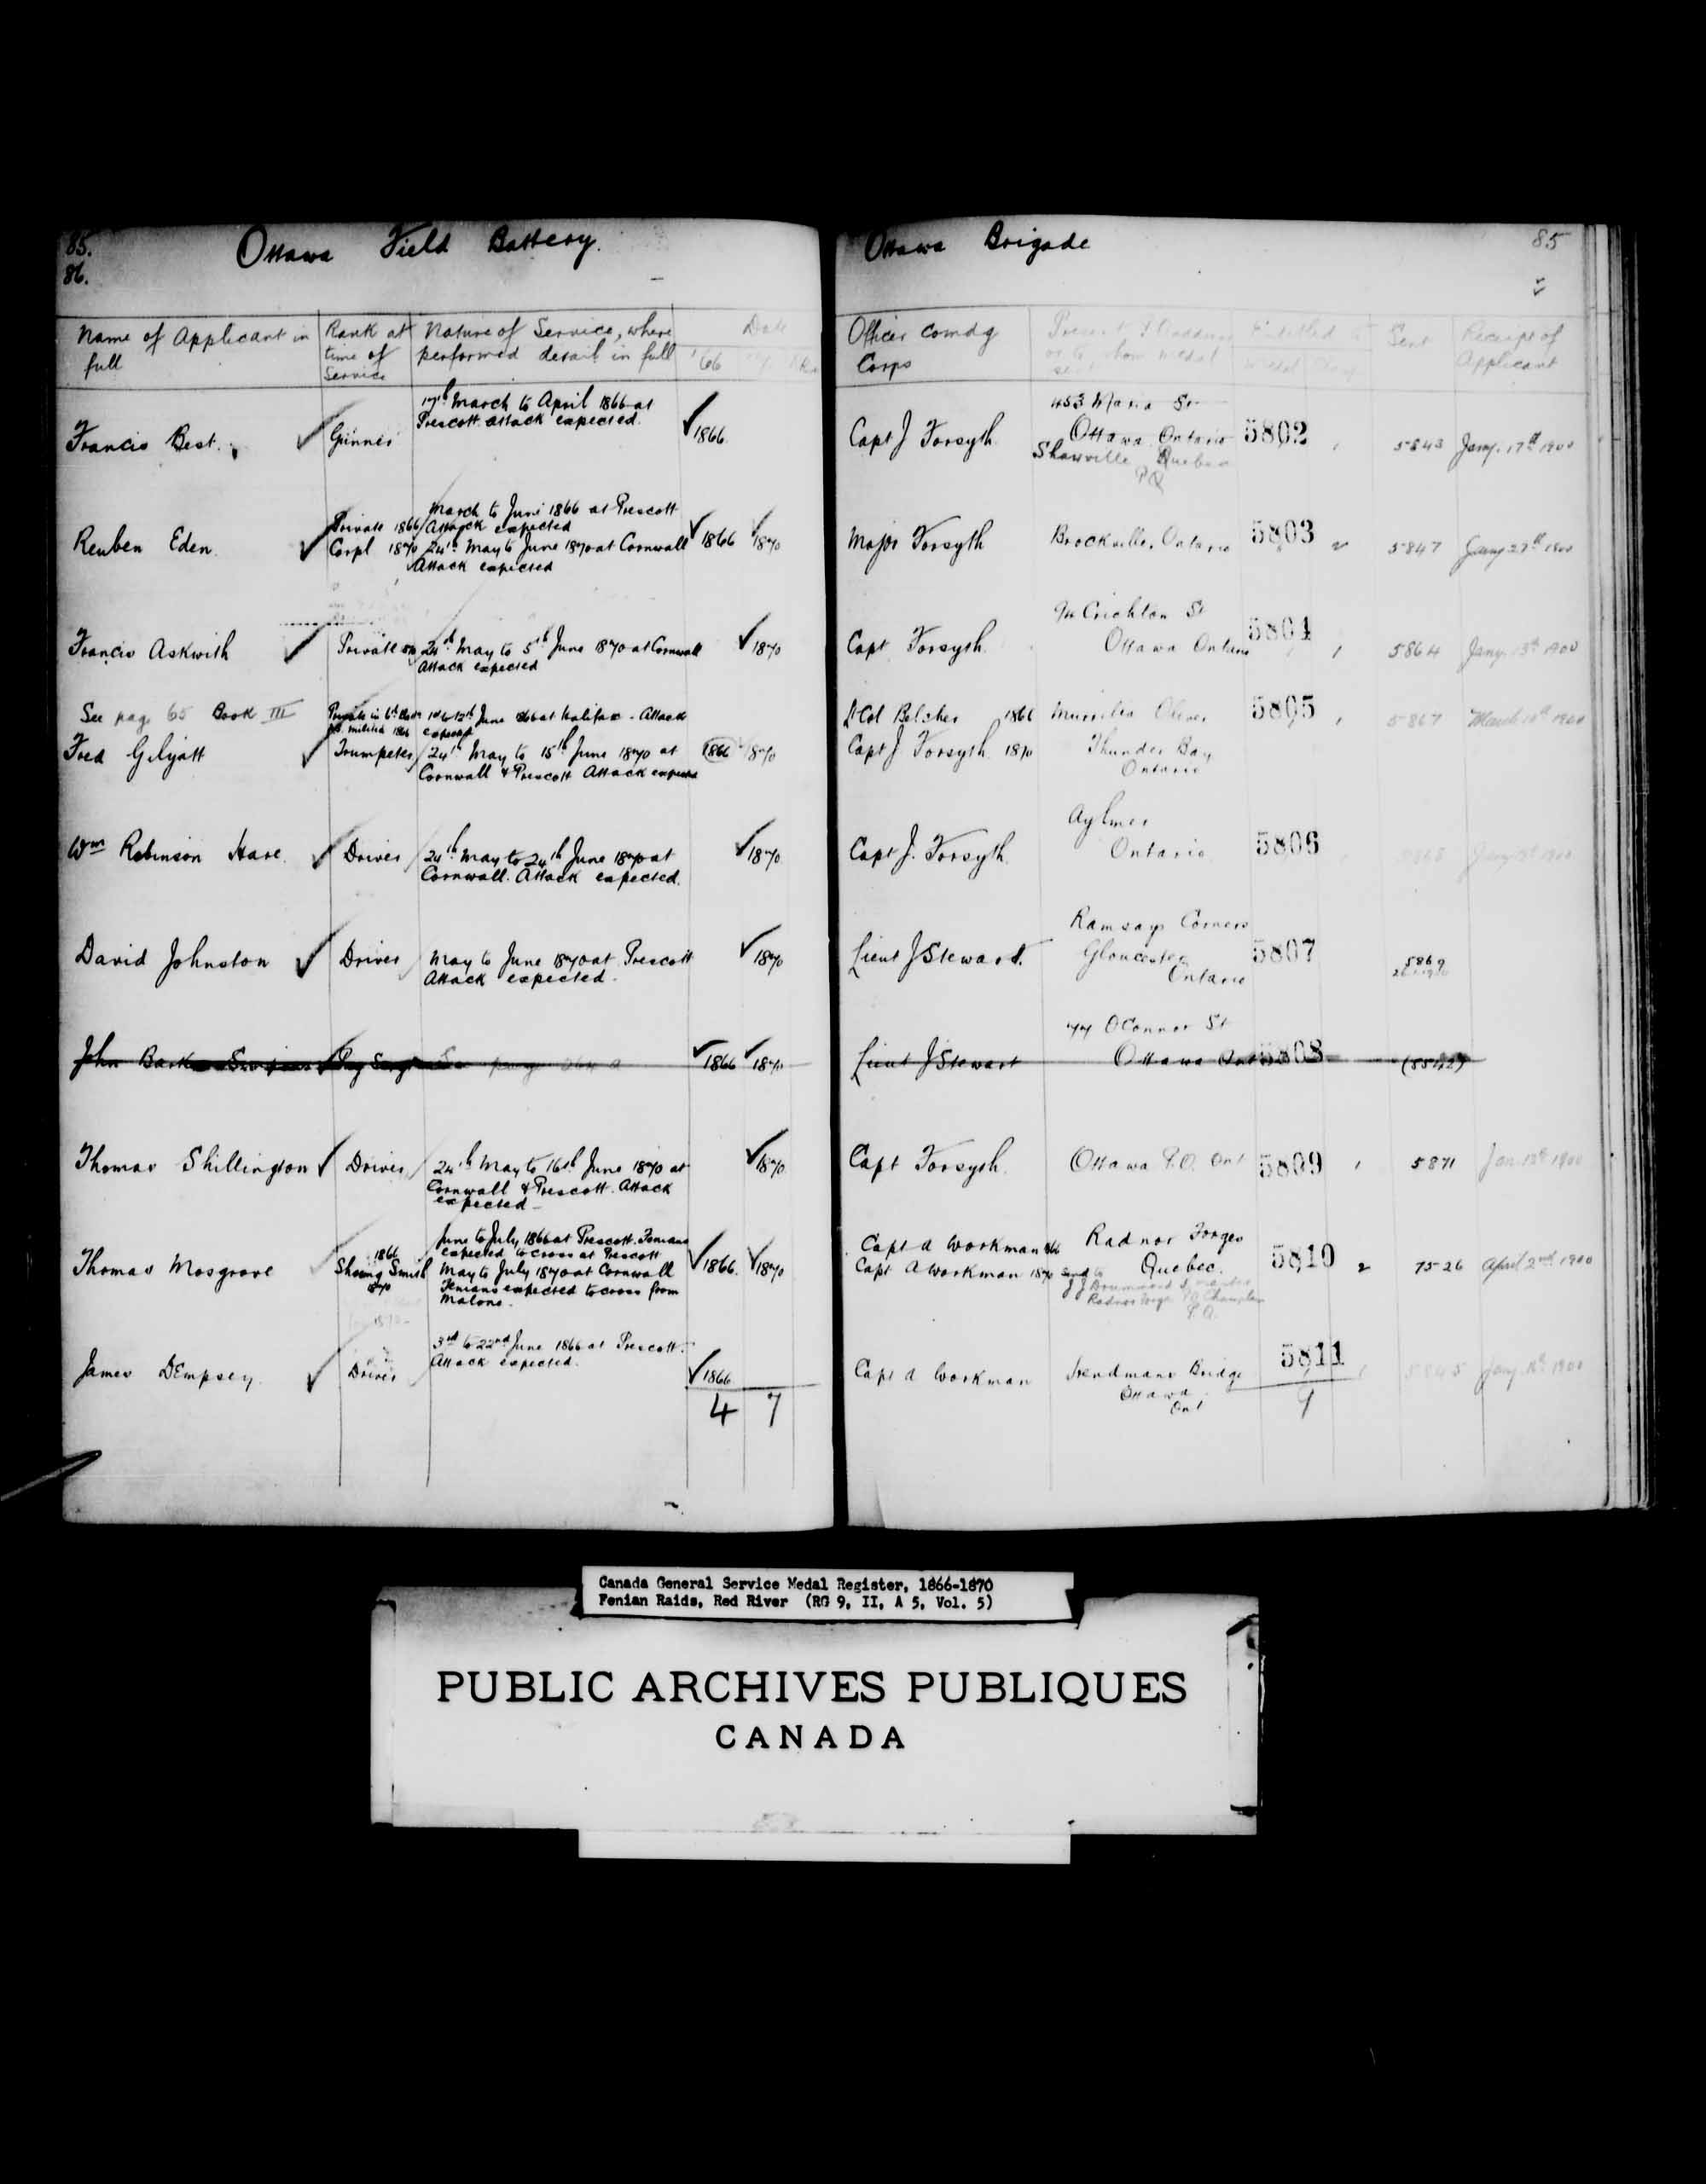 Digitized page of Medals, Honours and Awards for Image No.: e008682146